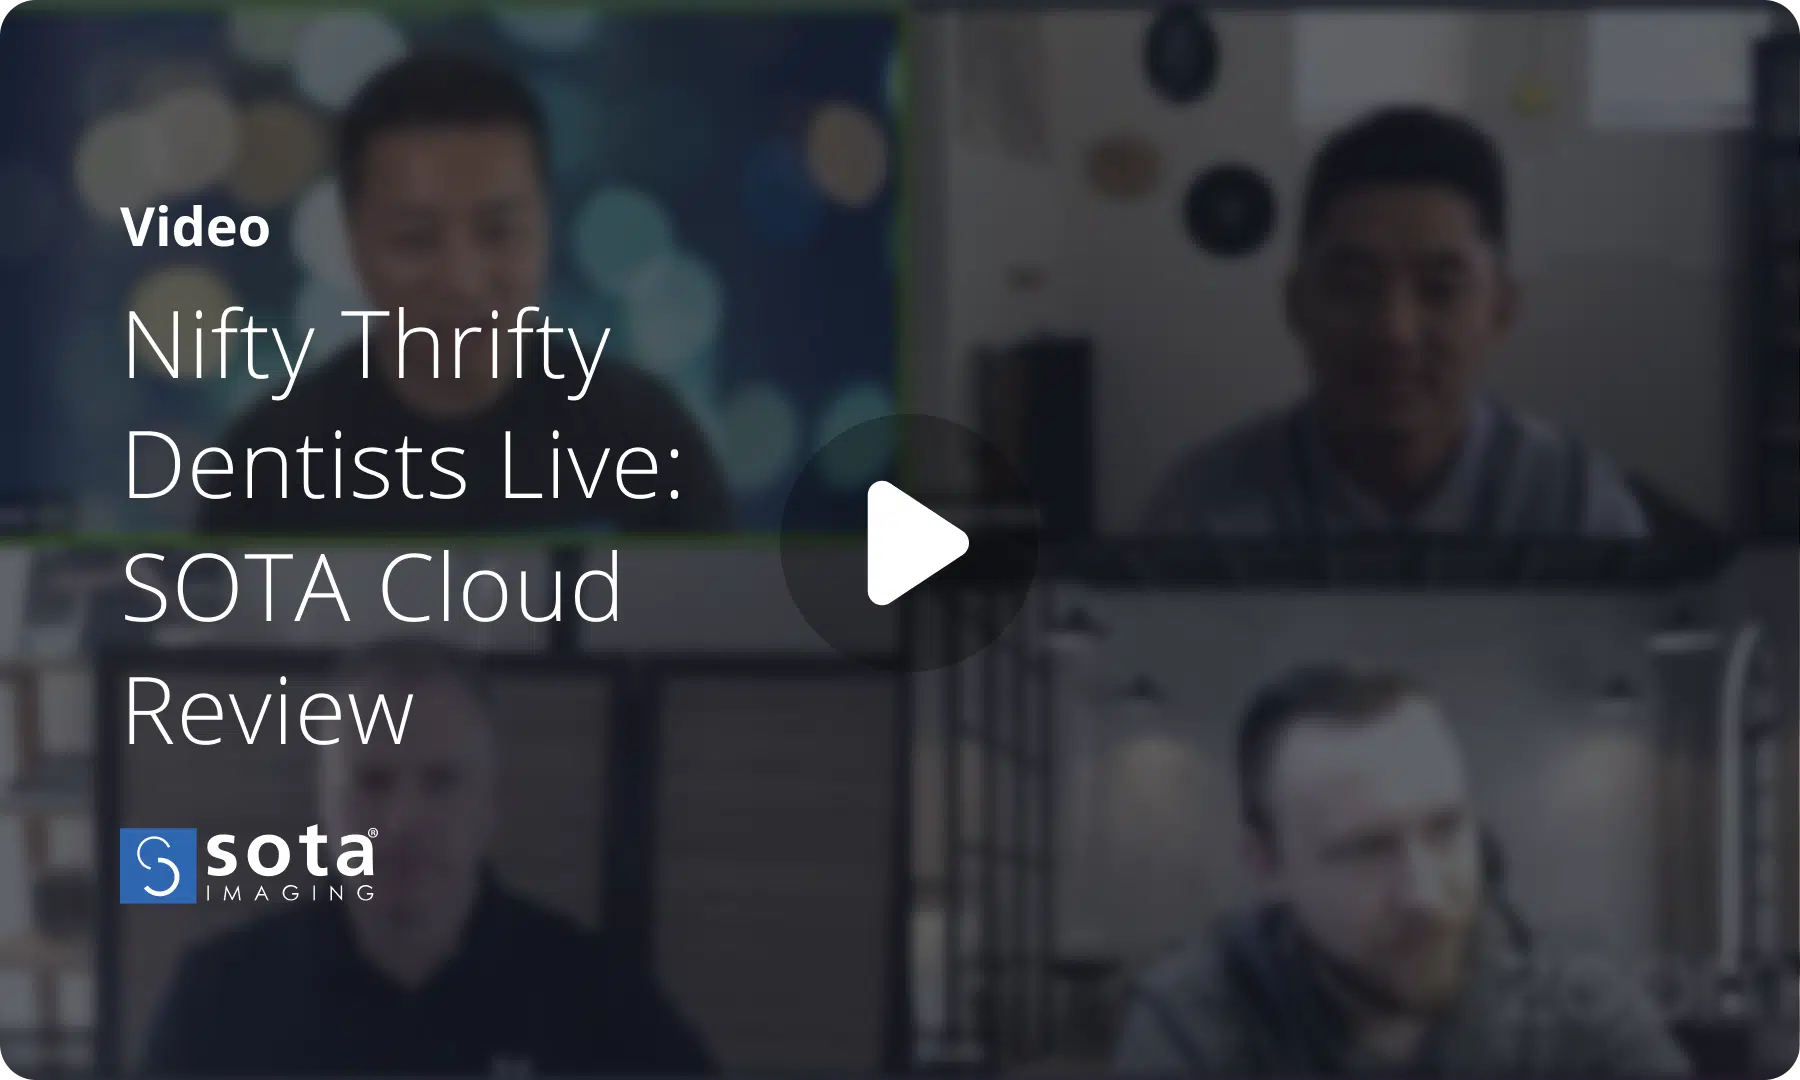 Nifty Thrifty Live Interview of SOTA Imaging team about SOTA Cloud dental imaging software